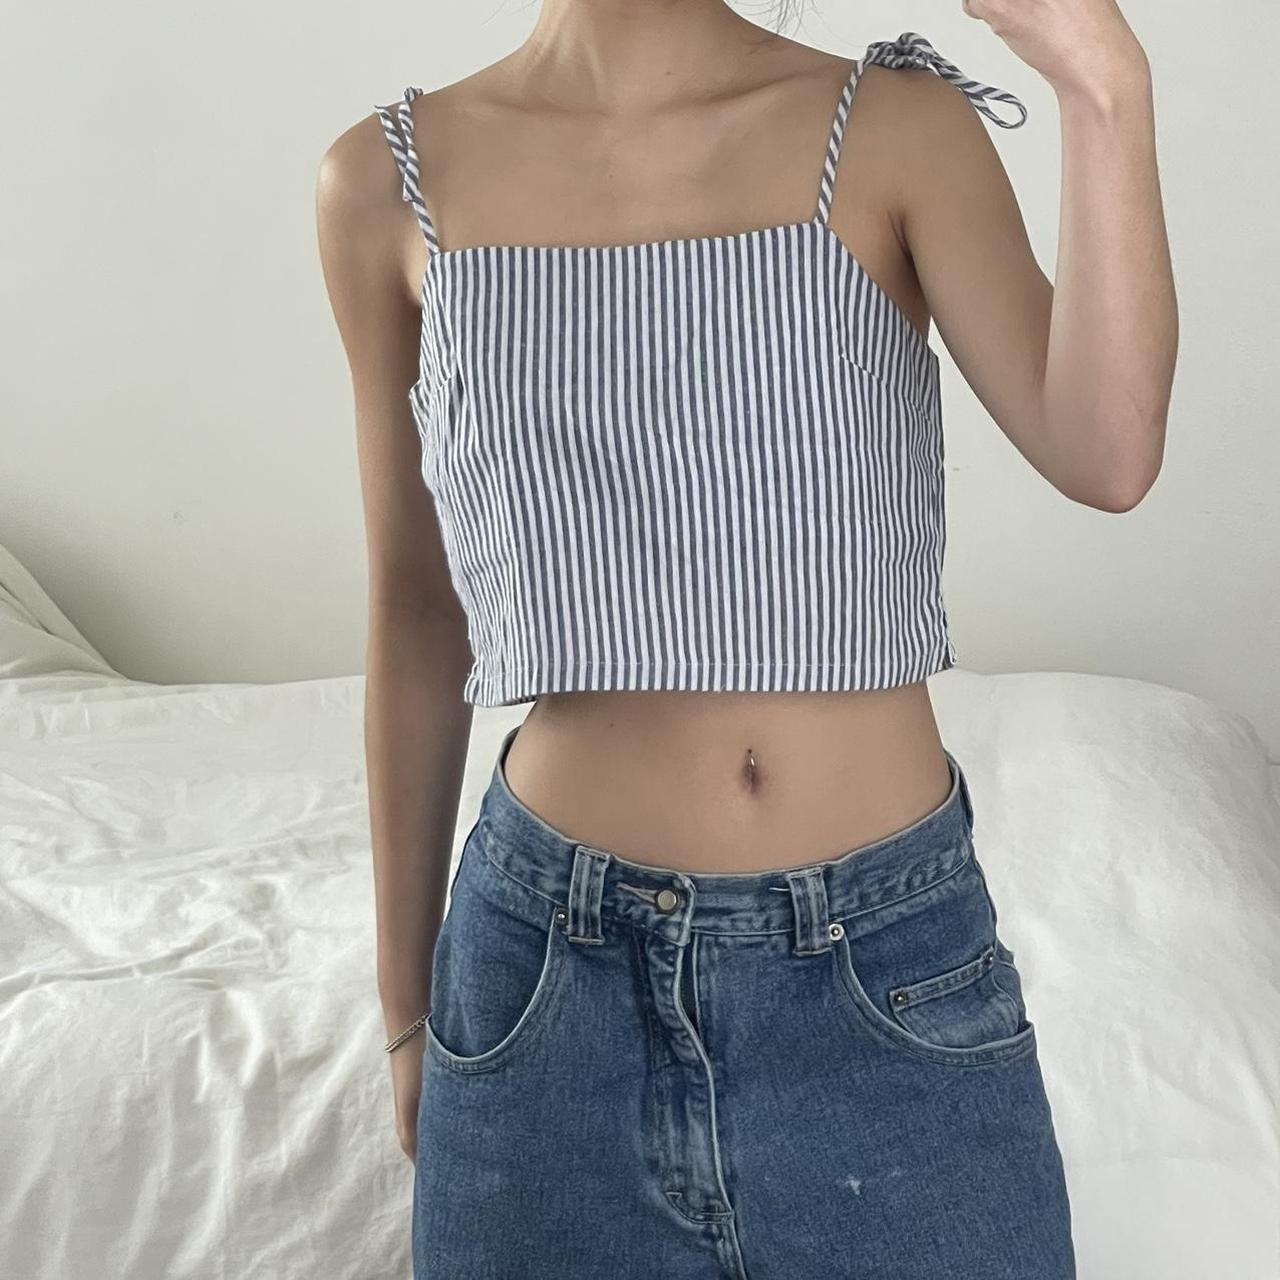 Brandy Melville red white blue striped cropped cotton tank top One Size